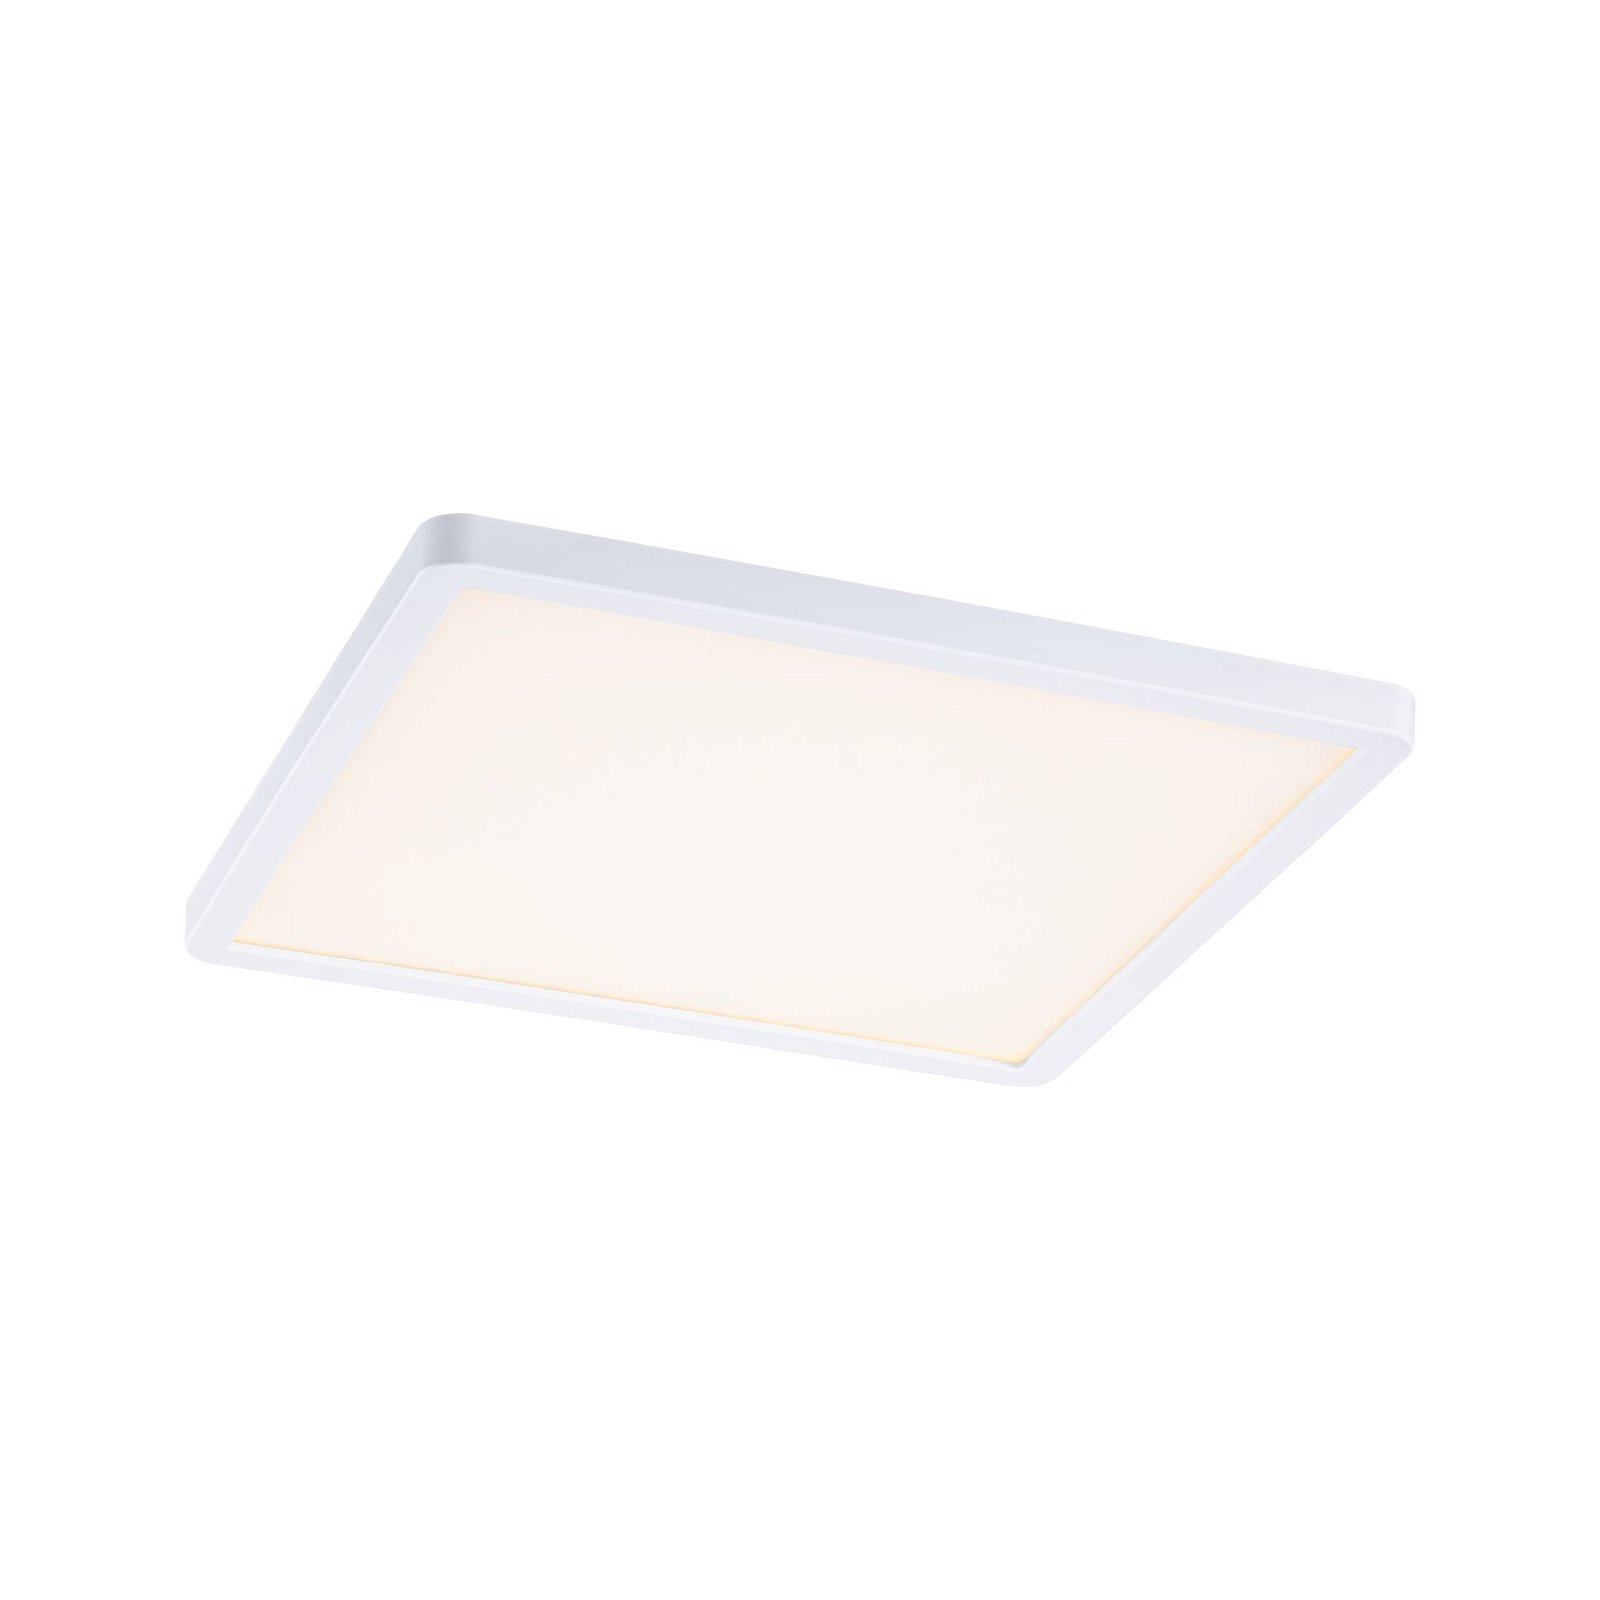 VariFit LED Recessed panel Smart Home Zigbee Areo IP44 square 230x230mm 16W 1400lm Tunable White White dimmable